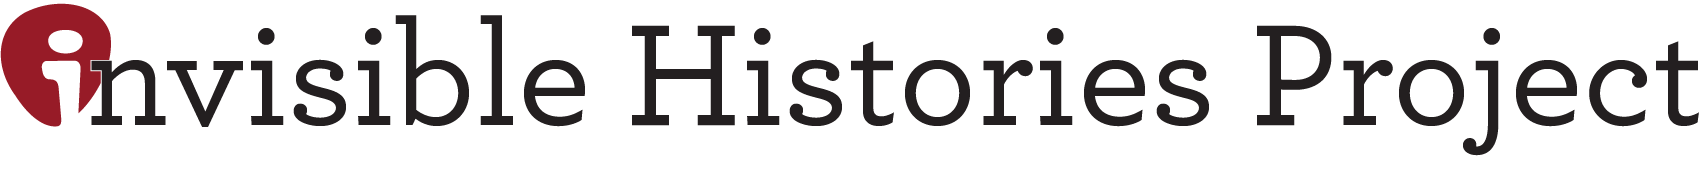 Invisible Histories Project Logo